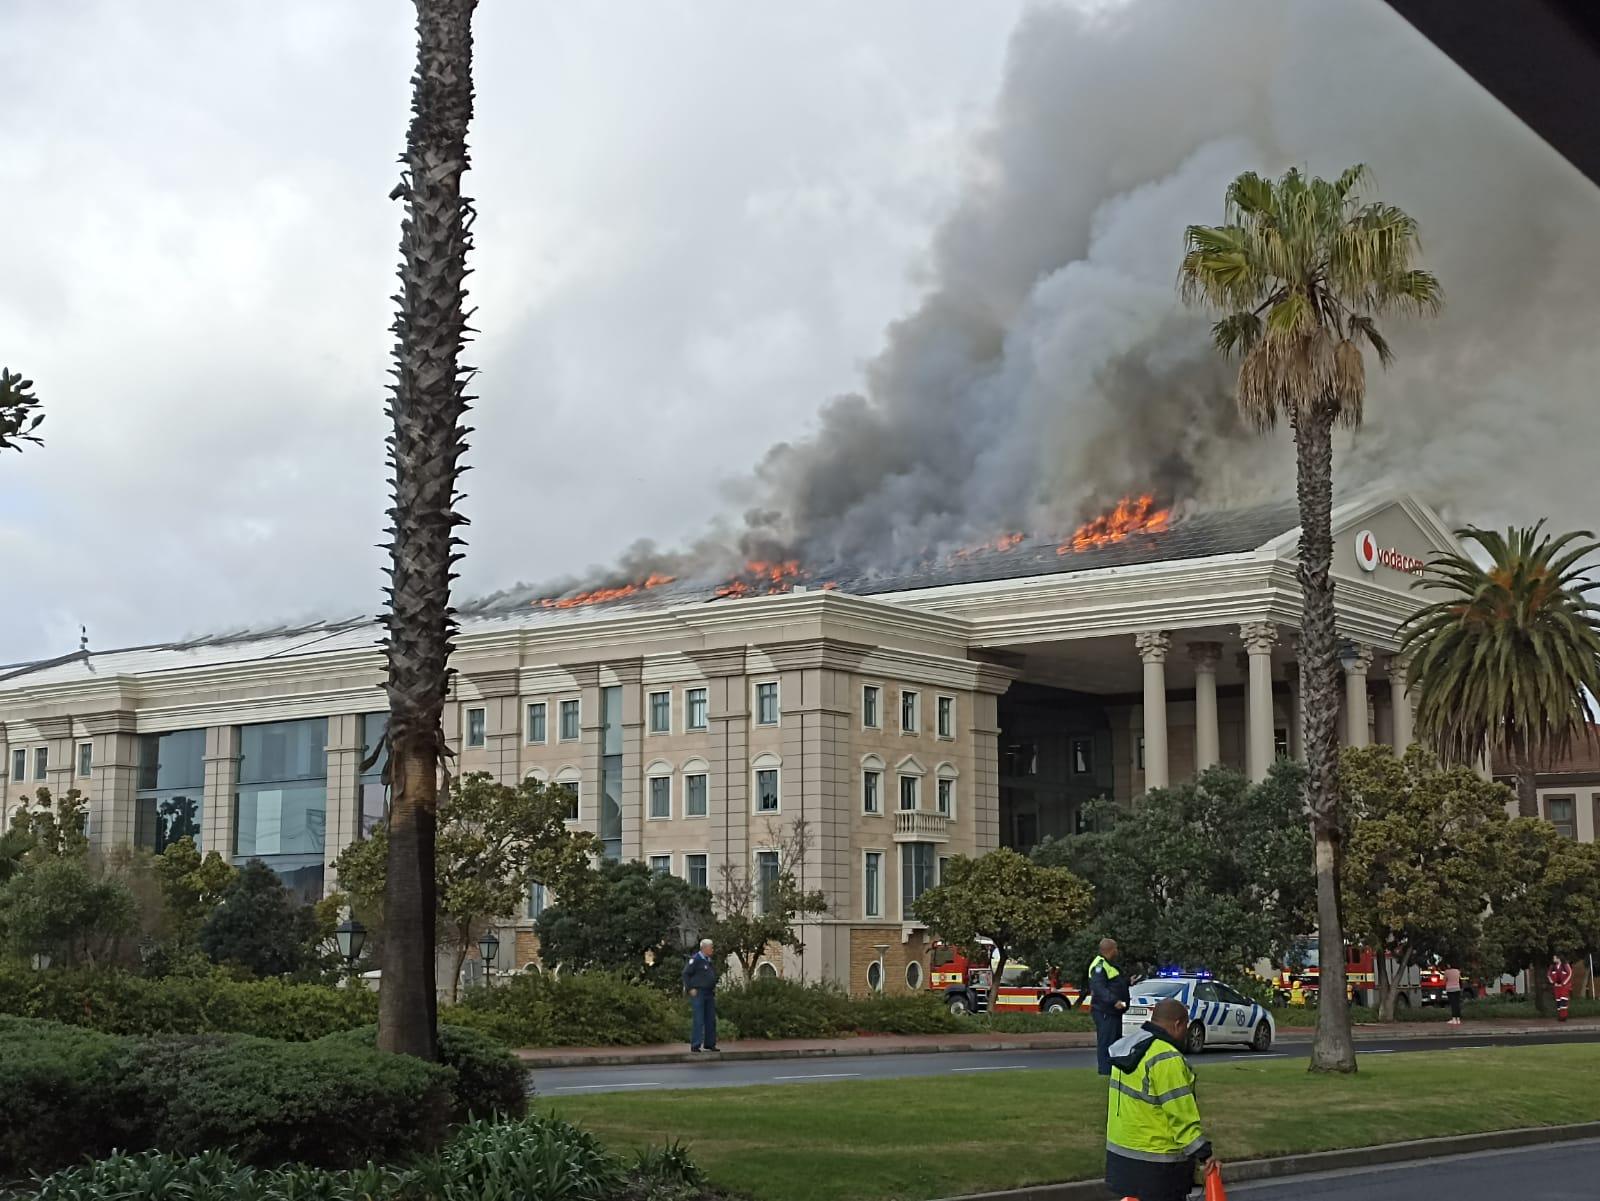 Vodacom building in Canal Walk, Cape Town is on fire